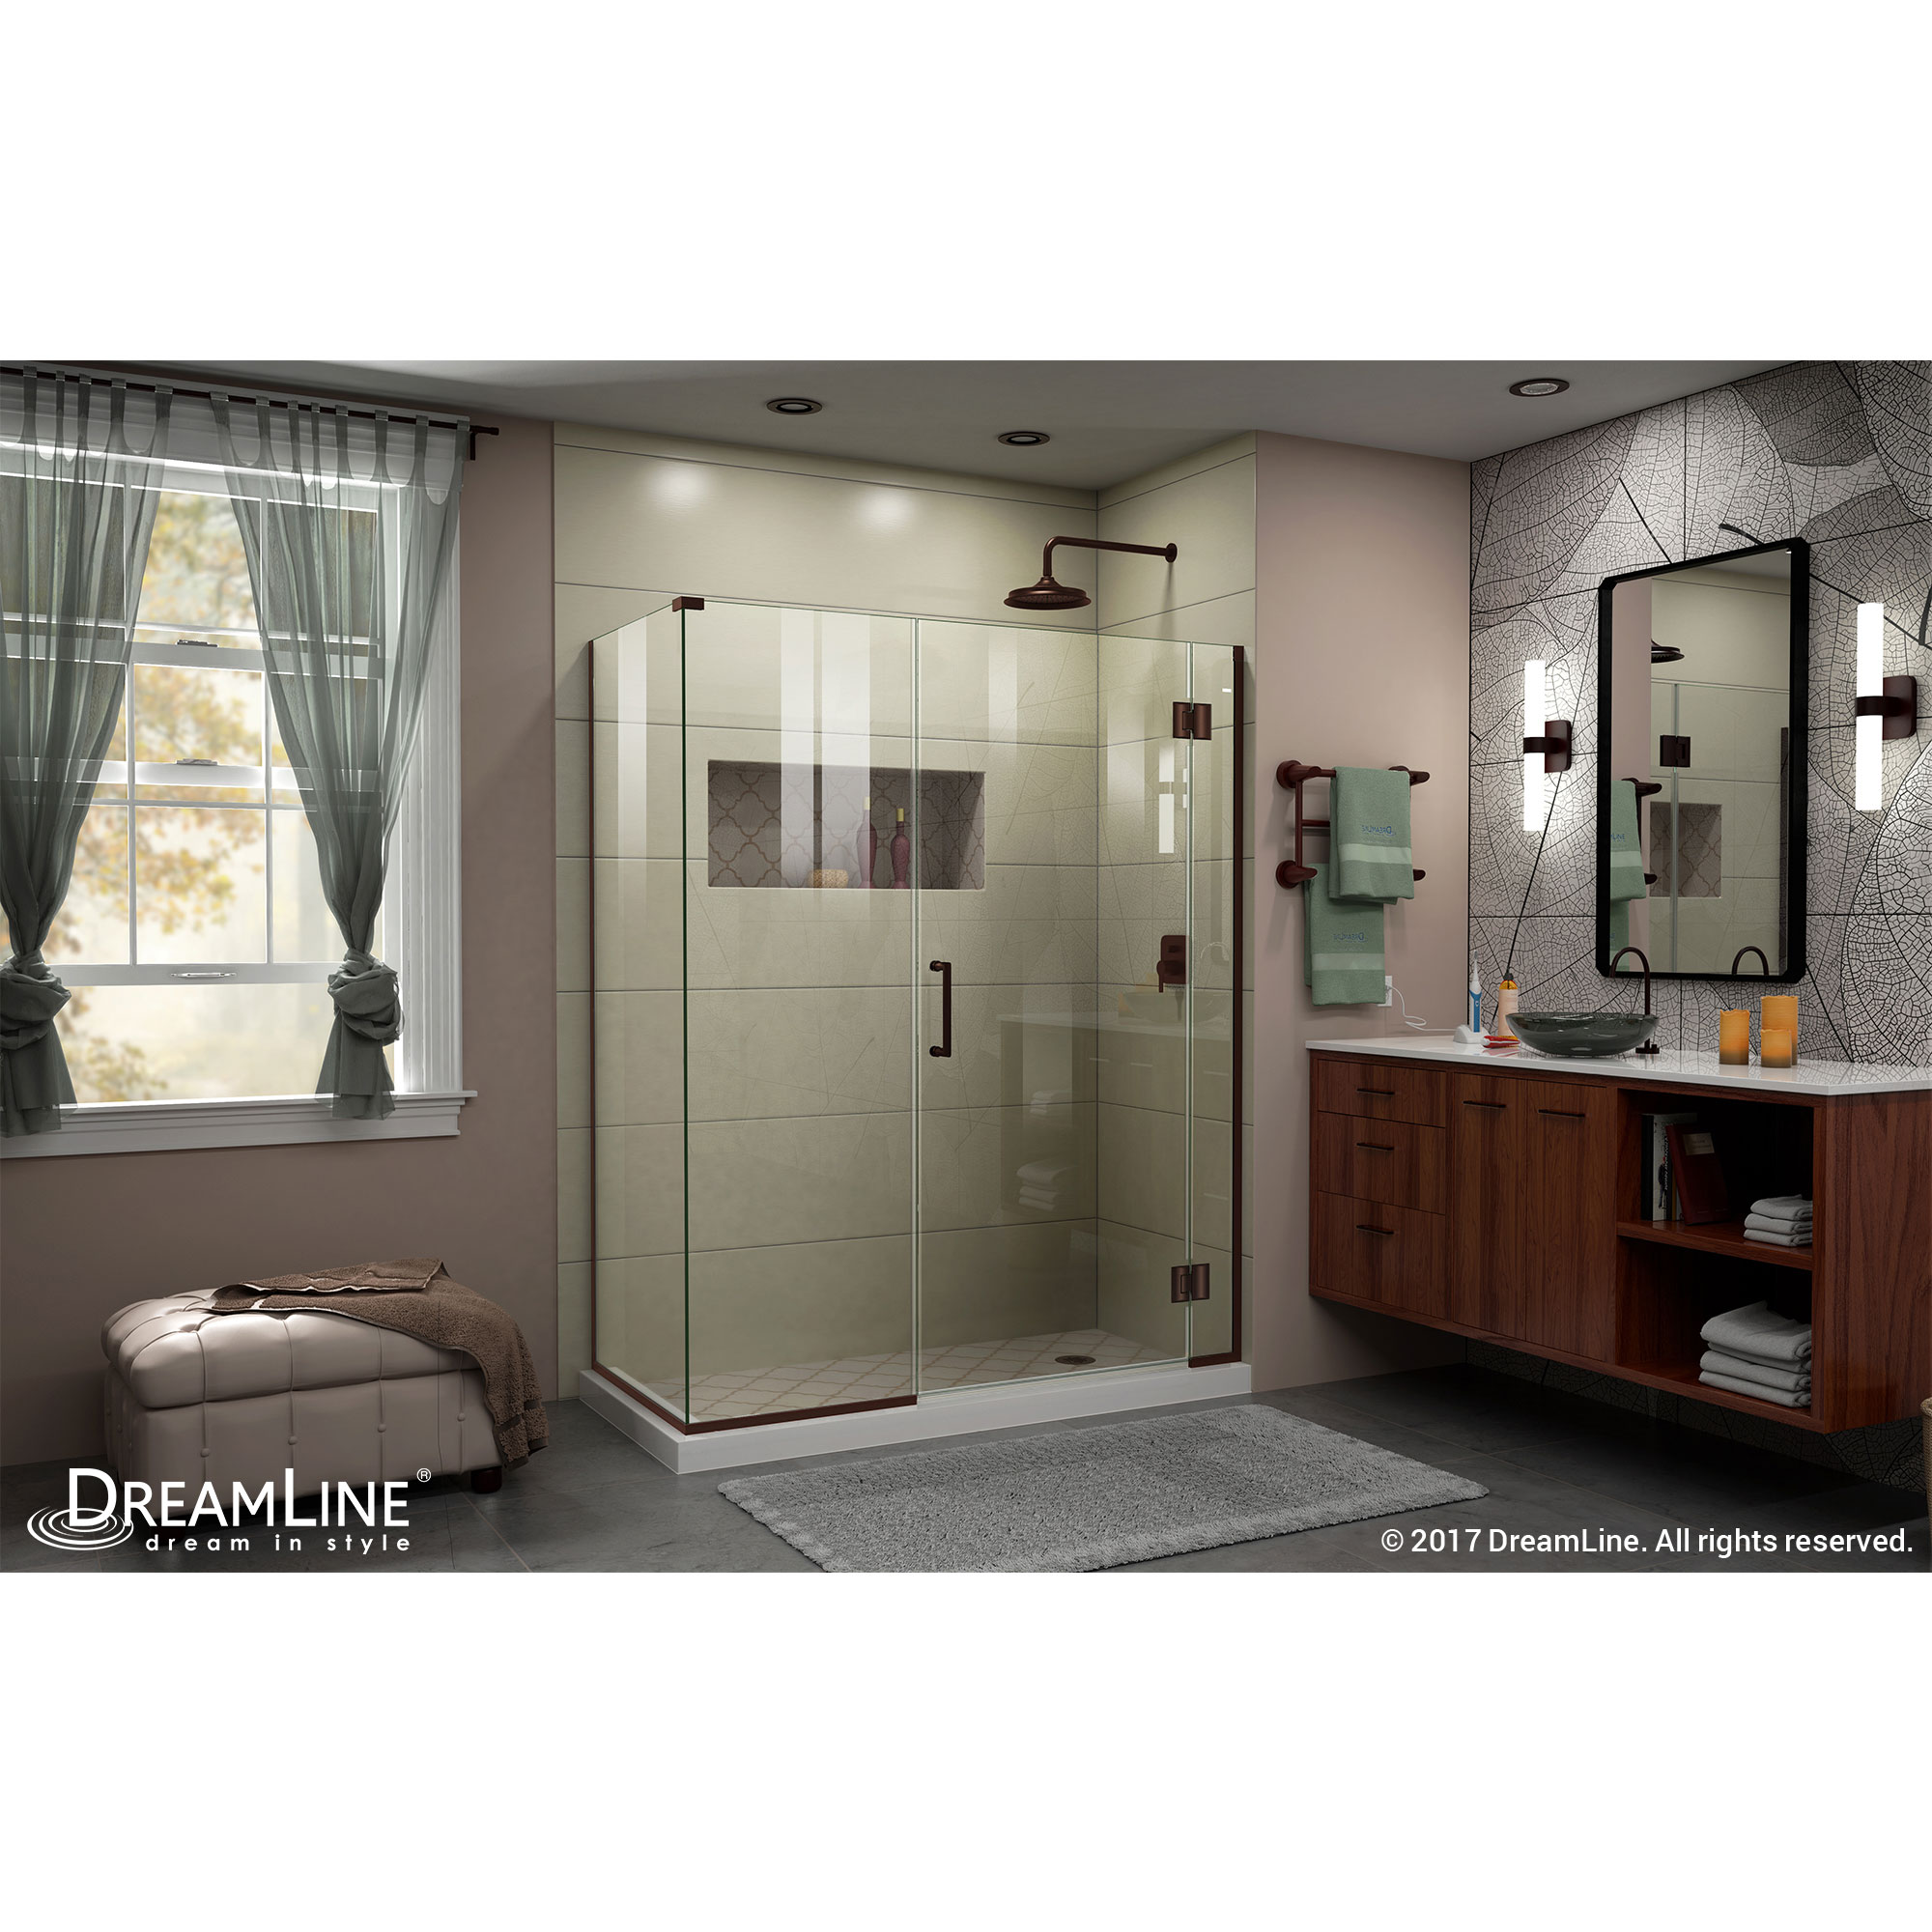 DreamLine Unidoor-X 52 in. W x 30 3/8 in. D x 72 in. H Frameless Hinged Shower Enclosure in Oil Rubbed Bronze